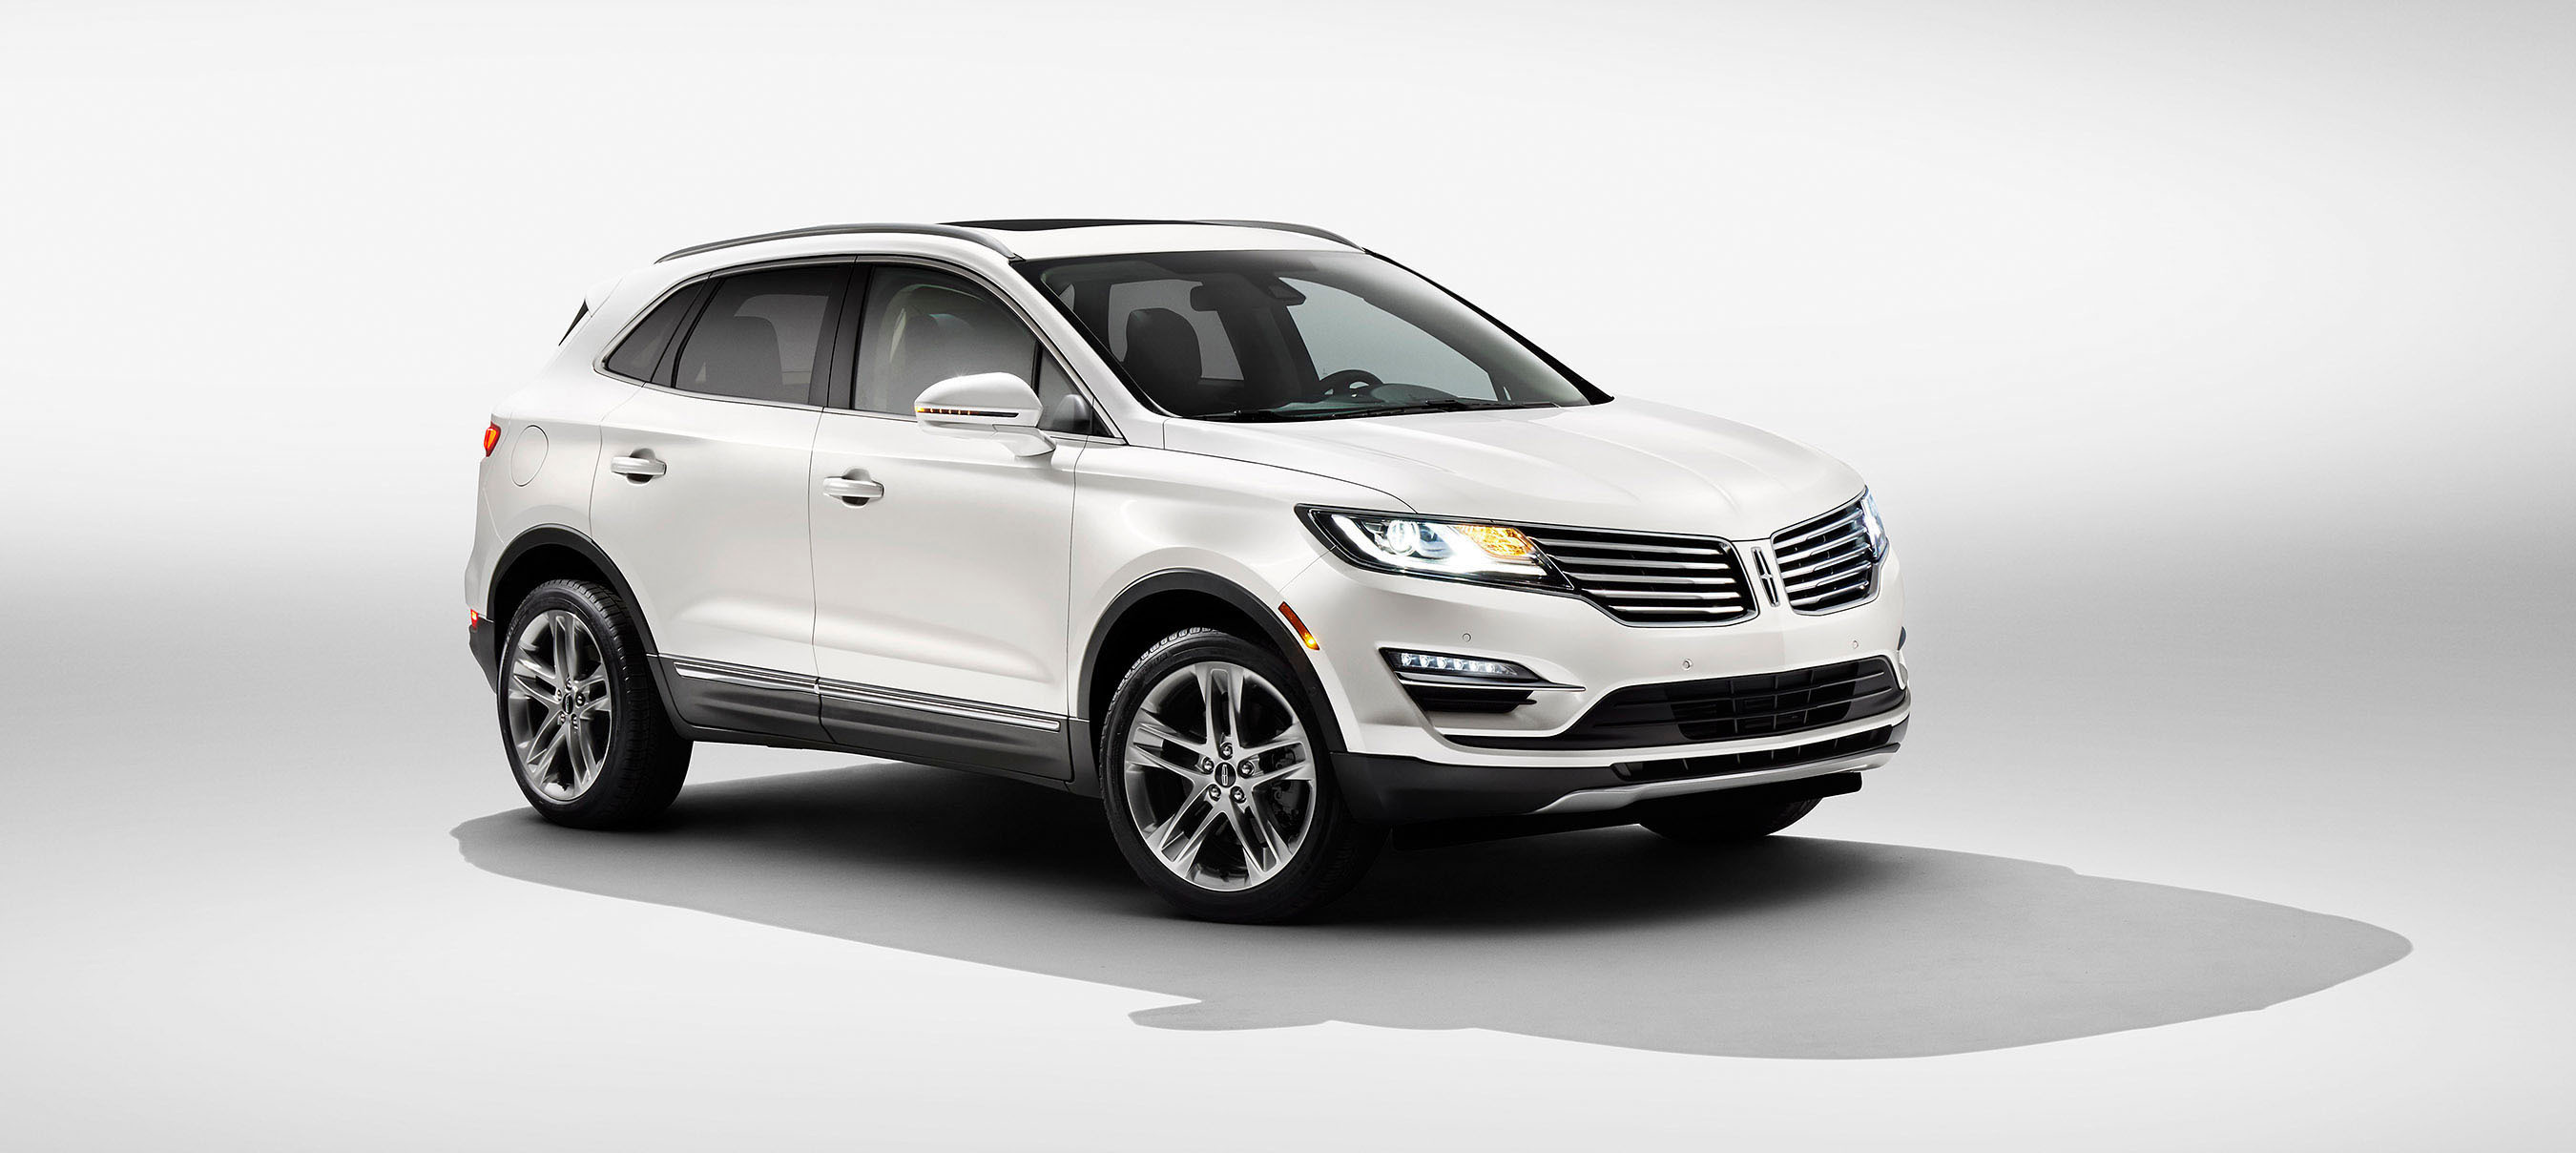 The Lincoln Motor Company introduces the all-new 2015 Lincoln MKC small premium utility vehicle, the second of four all-new Lincoln vehicles to fuel the brand's reinvention. (PRNewsFoto/Lincoln Motor Company) (PRNewsFoto/LINCOLN MOTOR COMPANY)